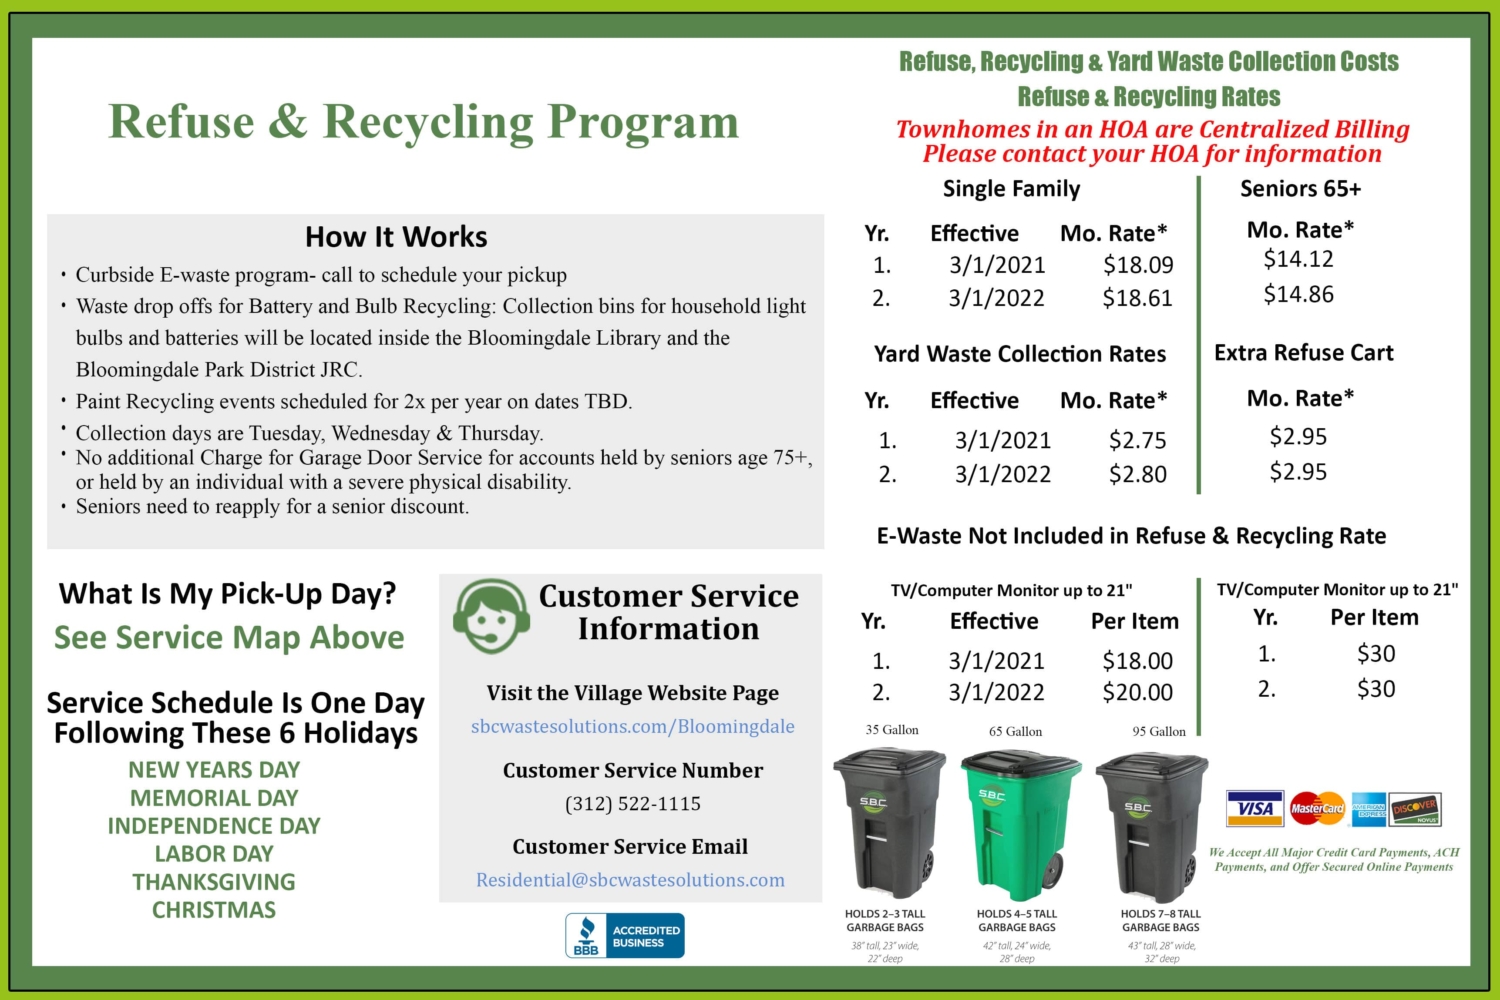 Bloomingdale resident information card for waste and recycling